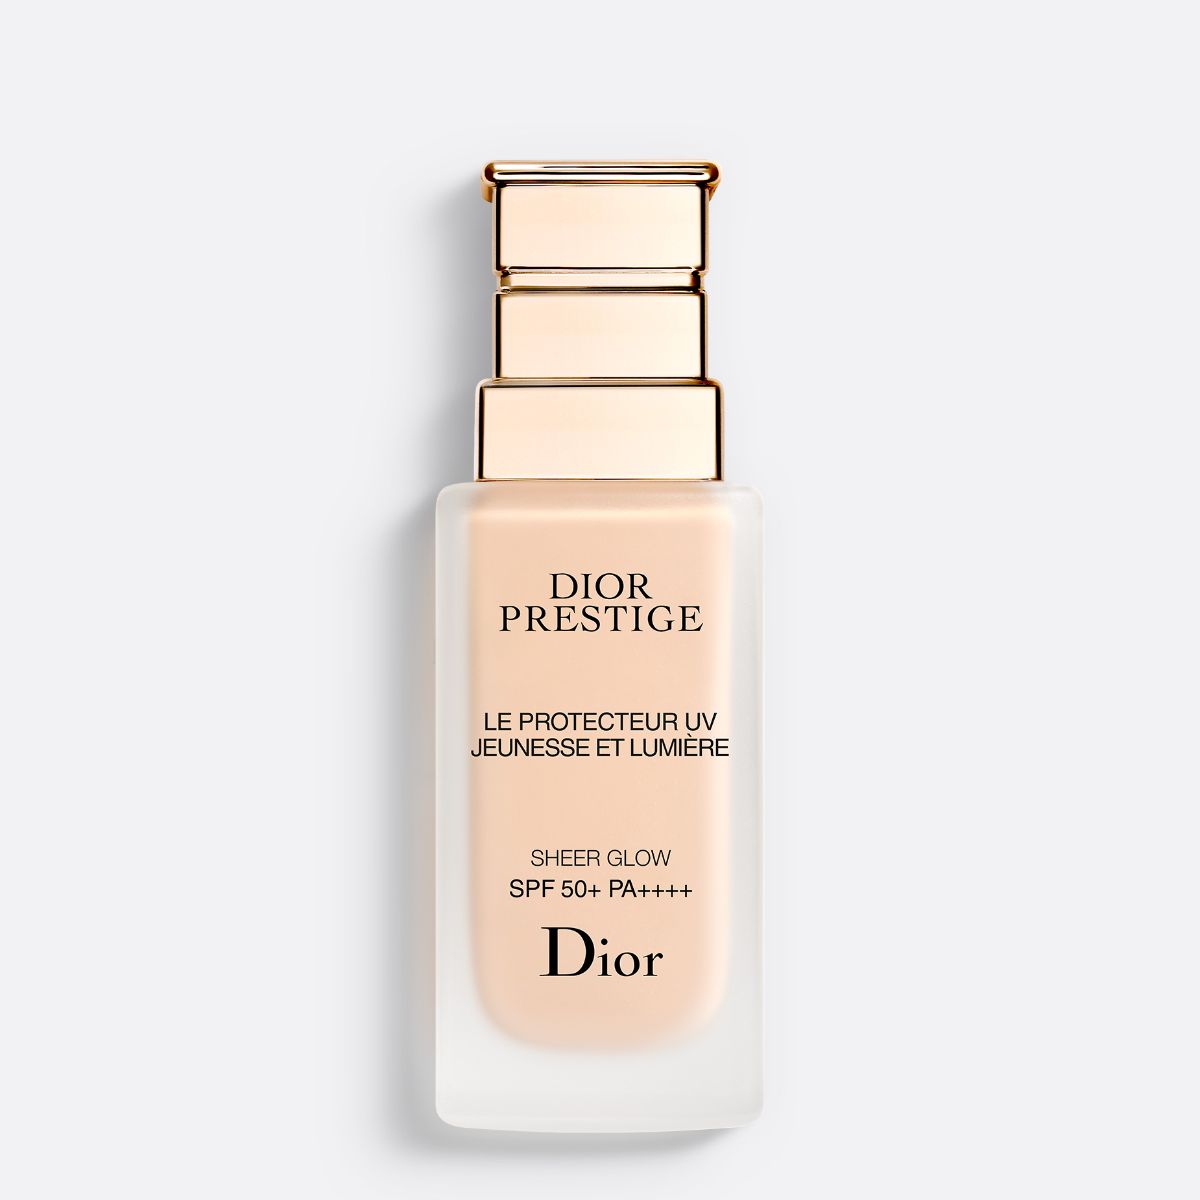 DIOR PRESTIGE LE PROTECTEUR UV JEUNESSE ET LUMIÈRE SHEER GLOW SPF 50+ PA++++  ~  Exceptional Skin-Protecting and Correcting Fluid - Face and Neck